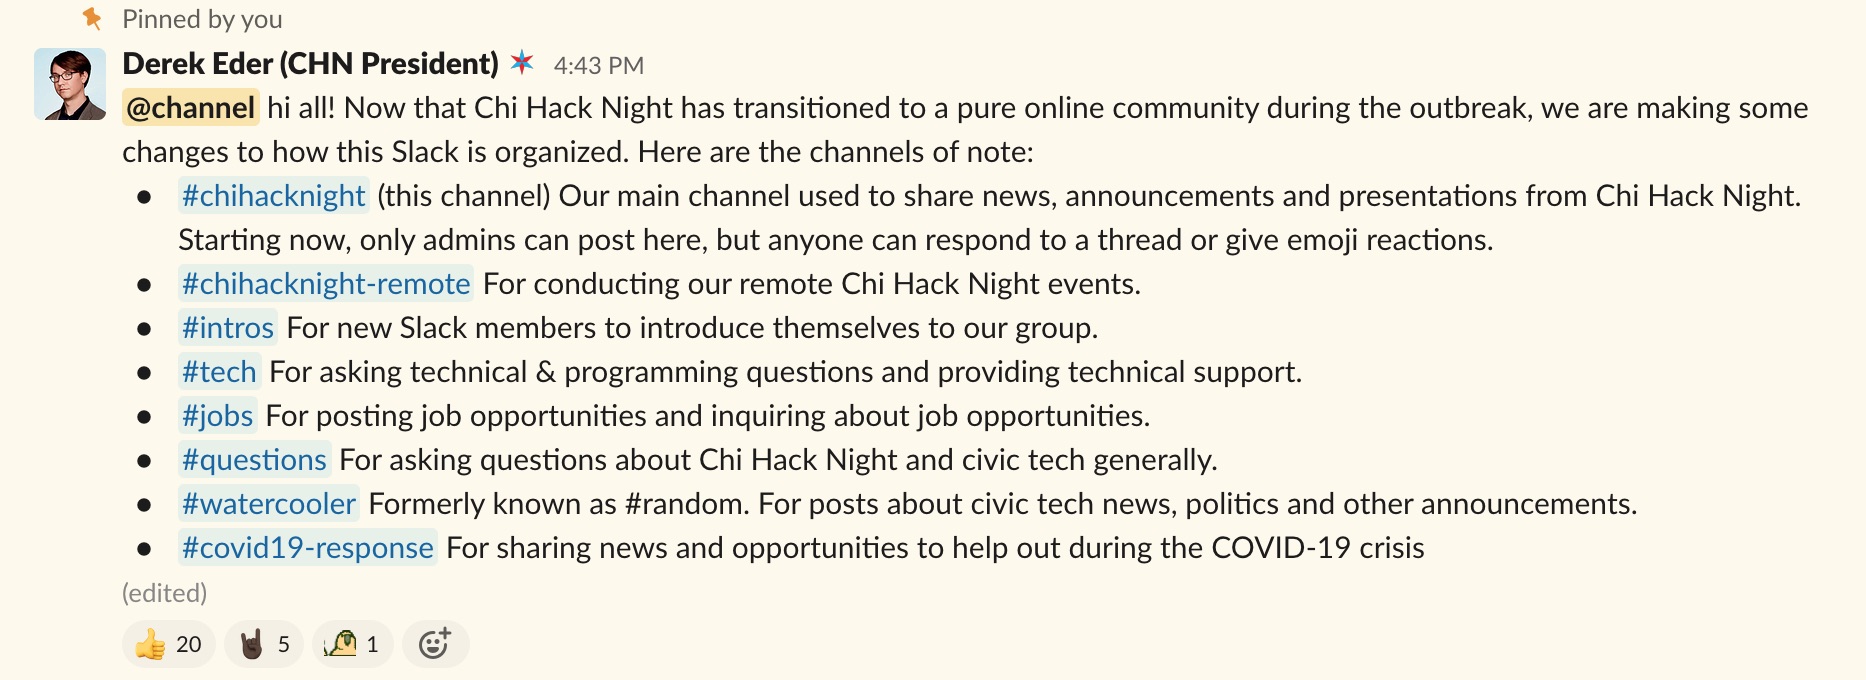 Pinned message on the Chi Hack Night Slack about our newly organized channels